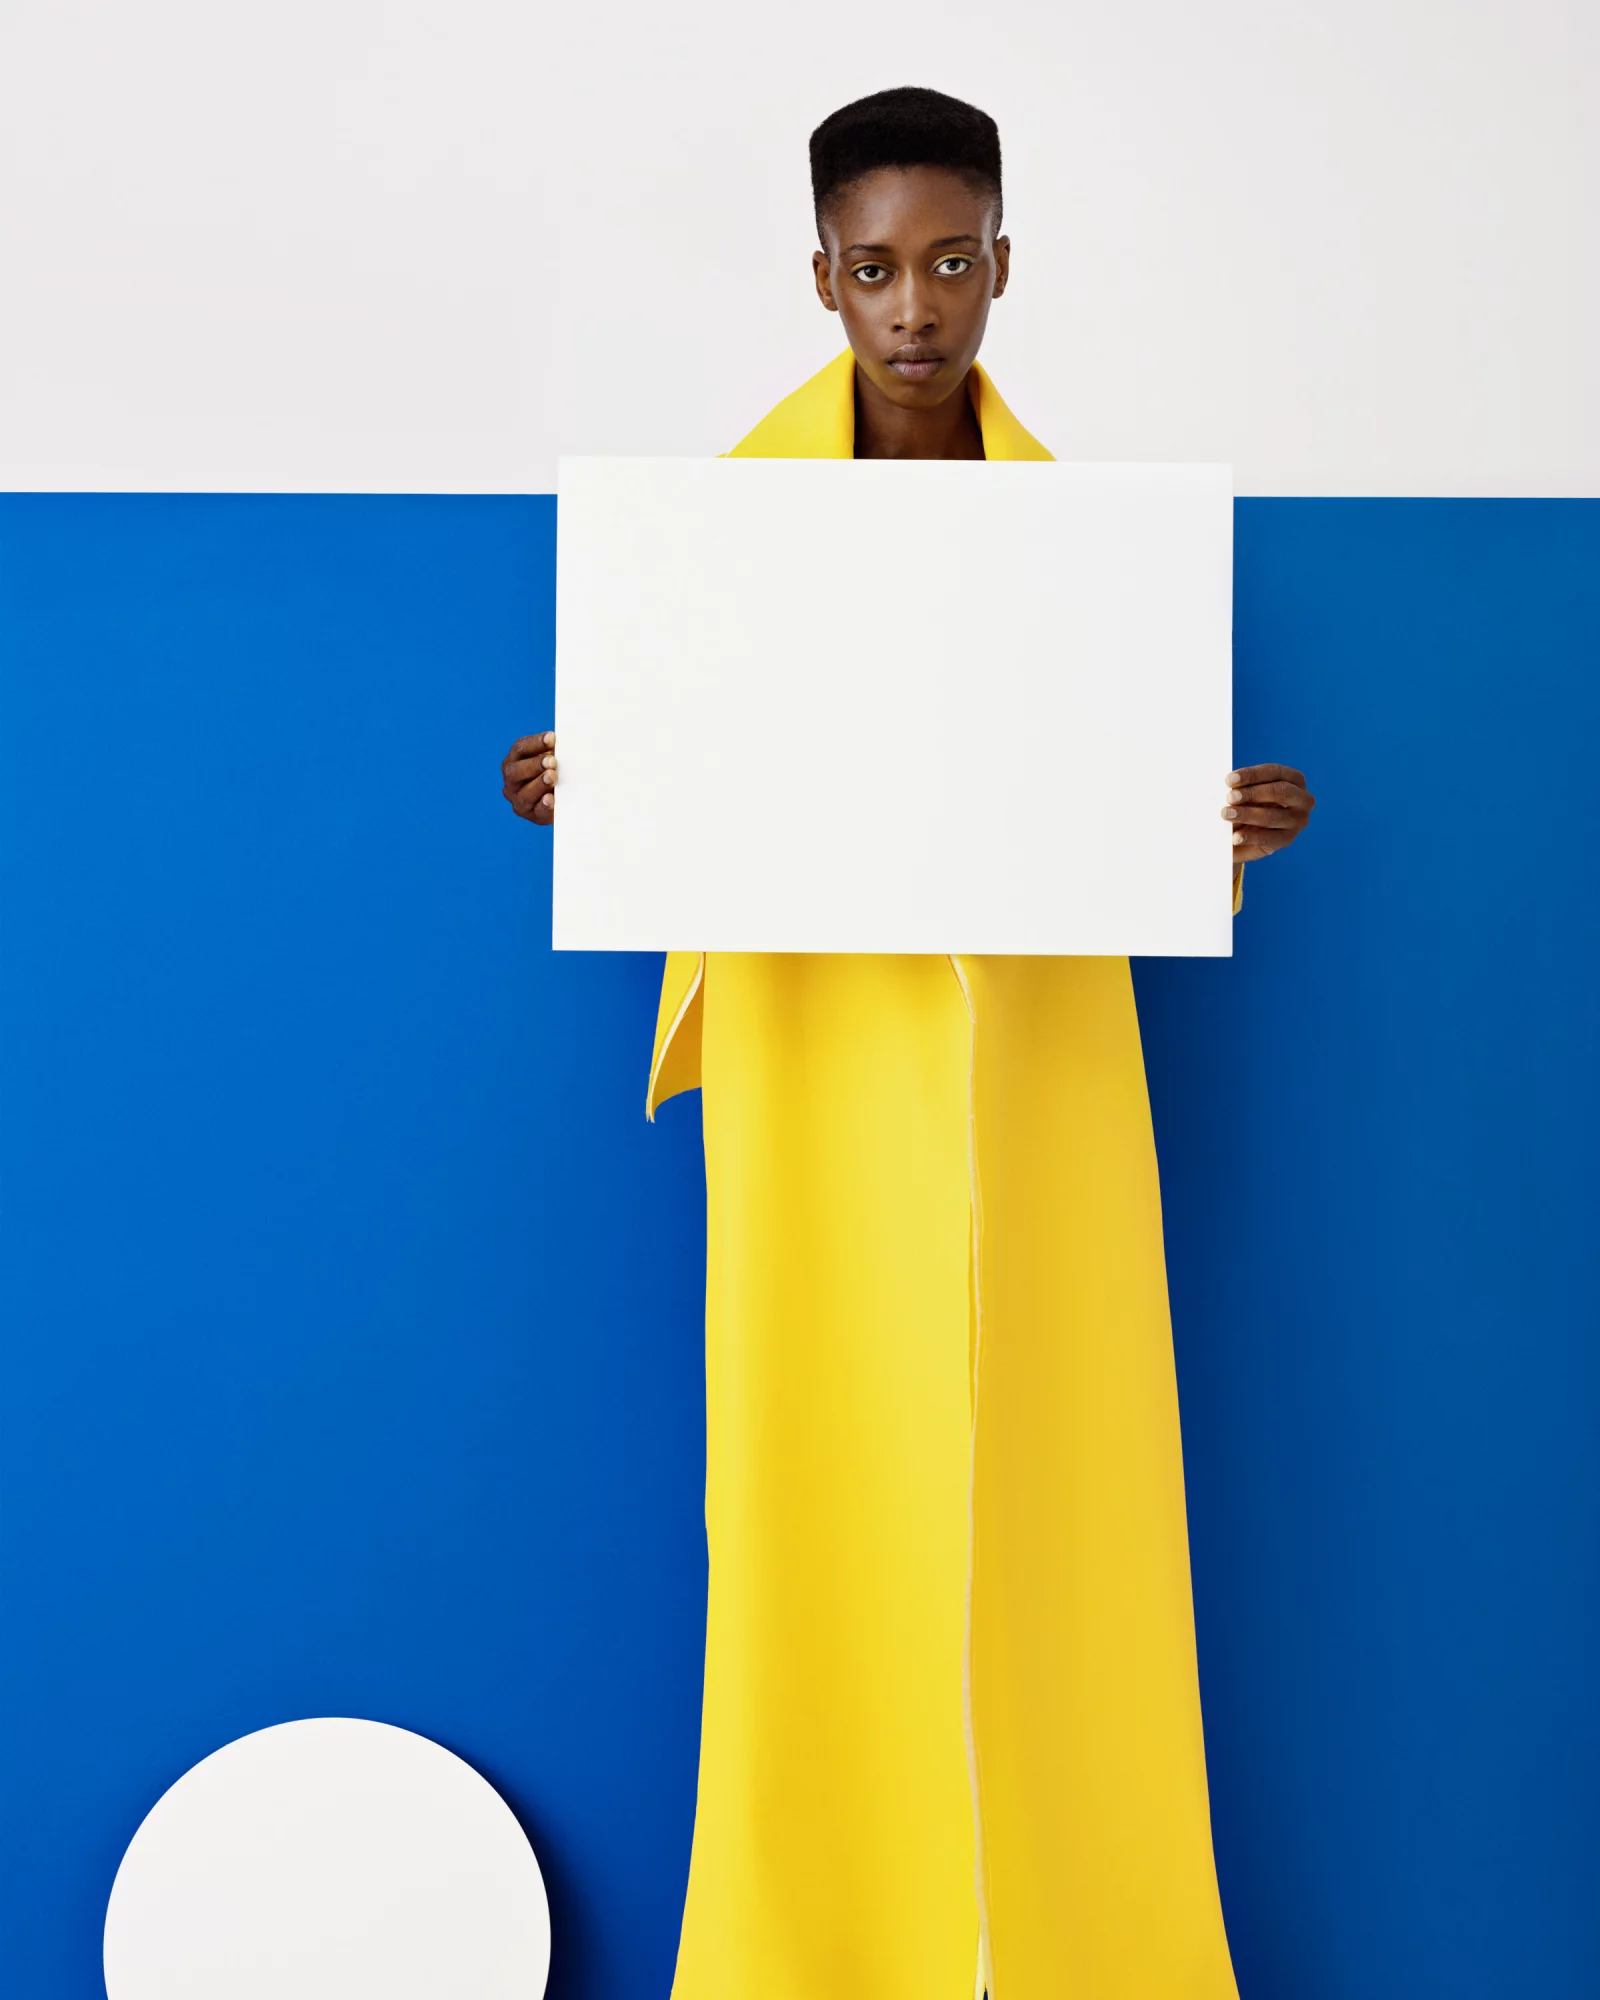 Objective 10 by Clemens ASCHER